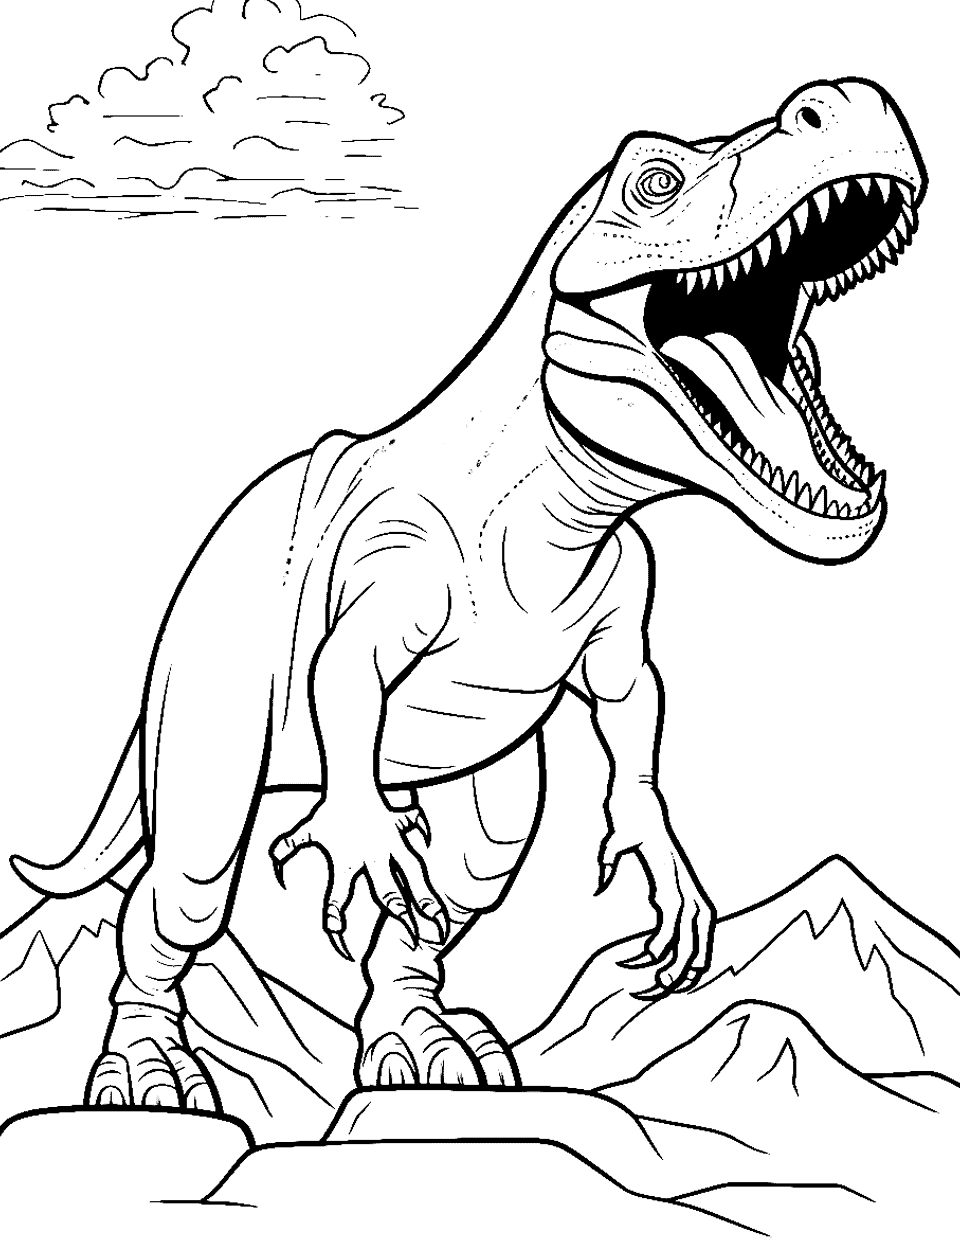 Mountain-Top T Rex T-rex Coloring Page - A T-Rex roaring victoriously atop a tall mountain.